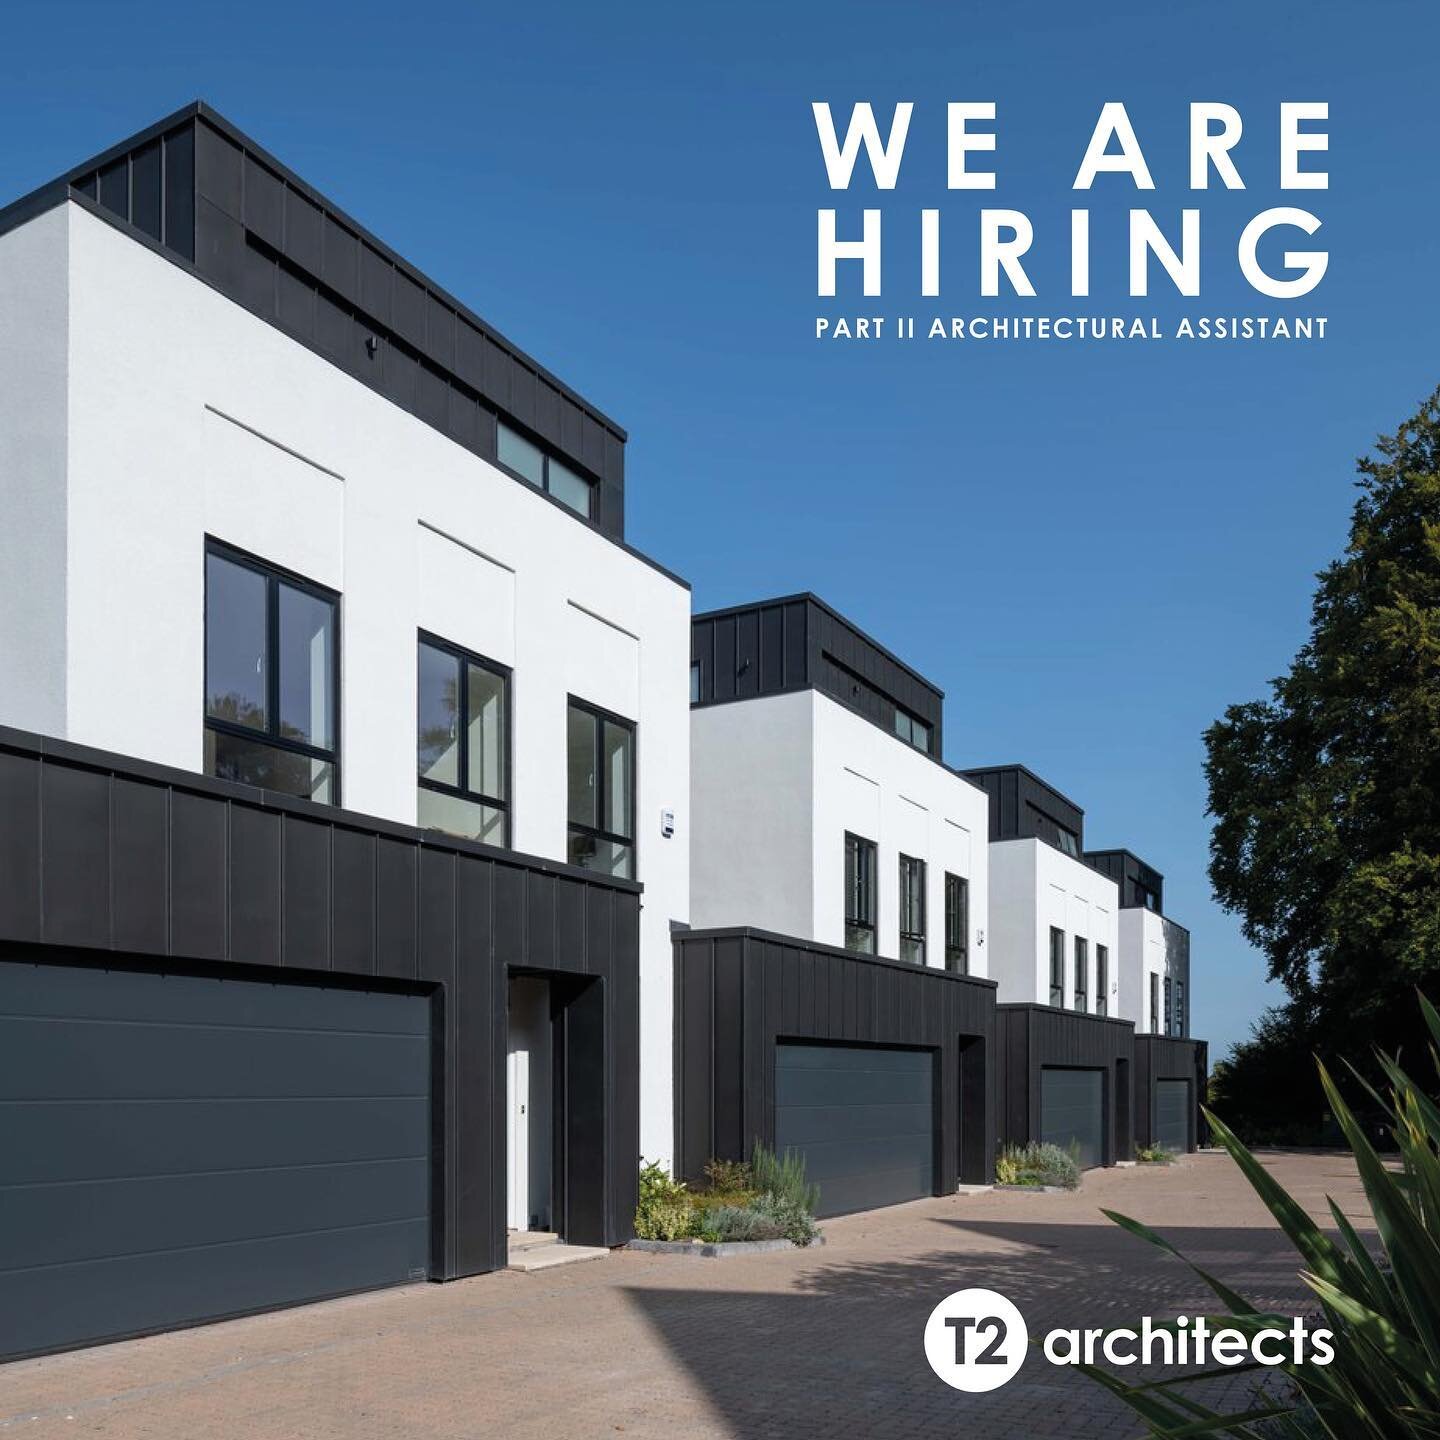 T2 architects are recruiting for a Part II Architectural Assistant to start from August 2023.
&nbsp;
To apply, you will need to have completed your RIBA Part II by Summer 2023 and be eligible to work in the UK.
&nbsp;
The successful candidate will be